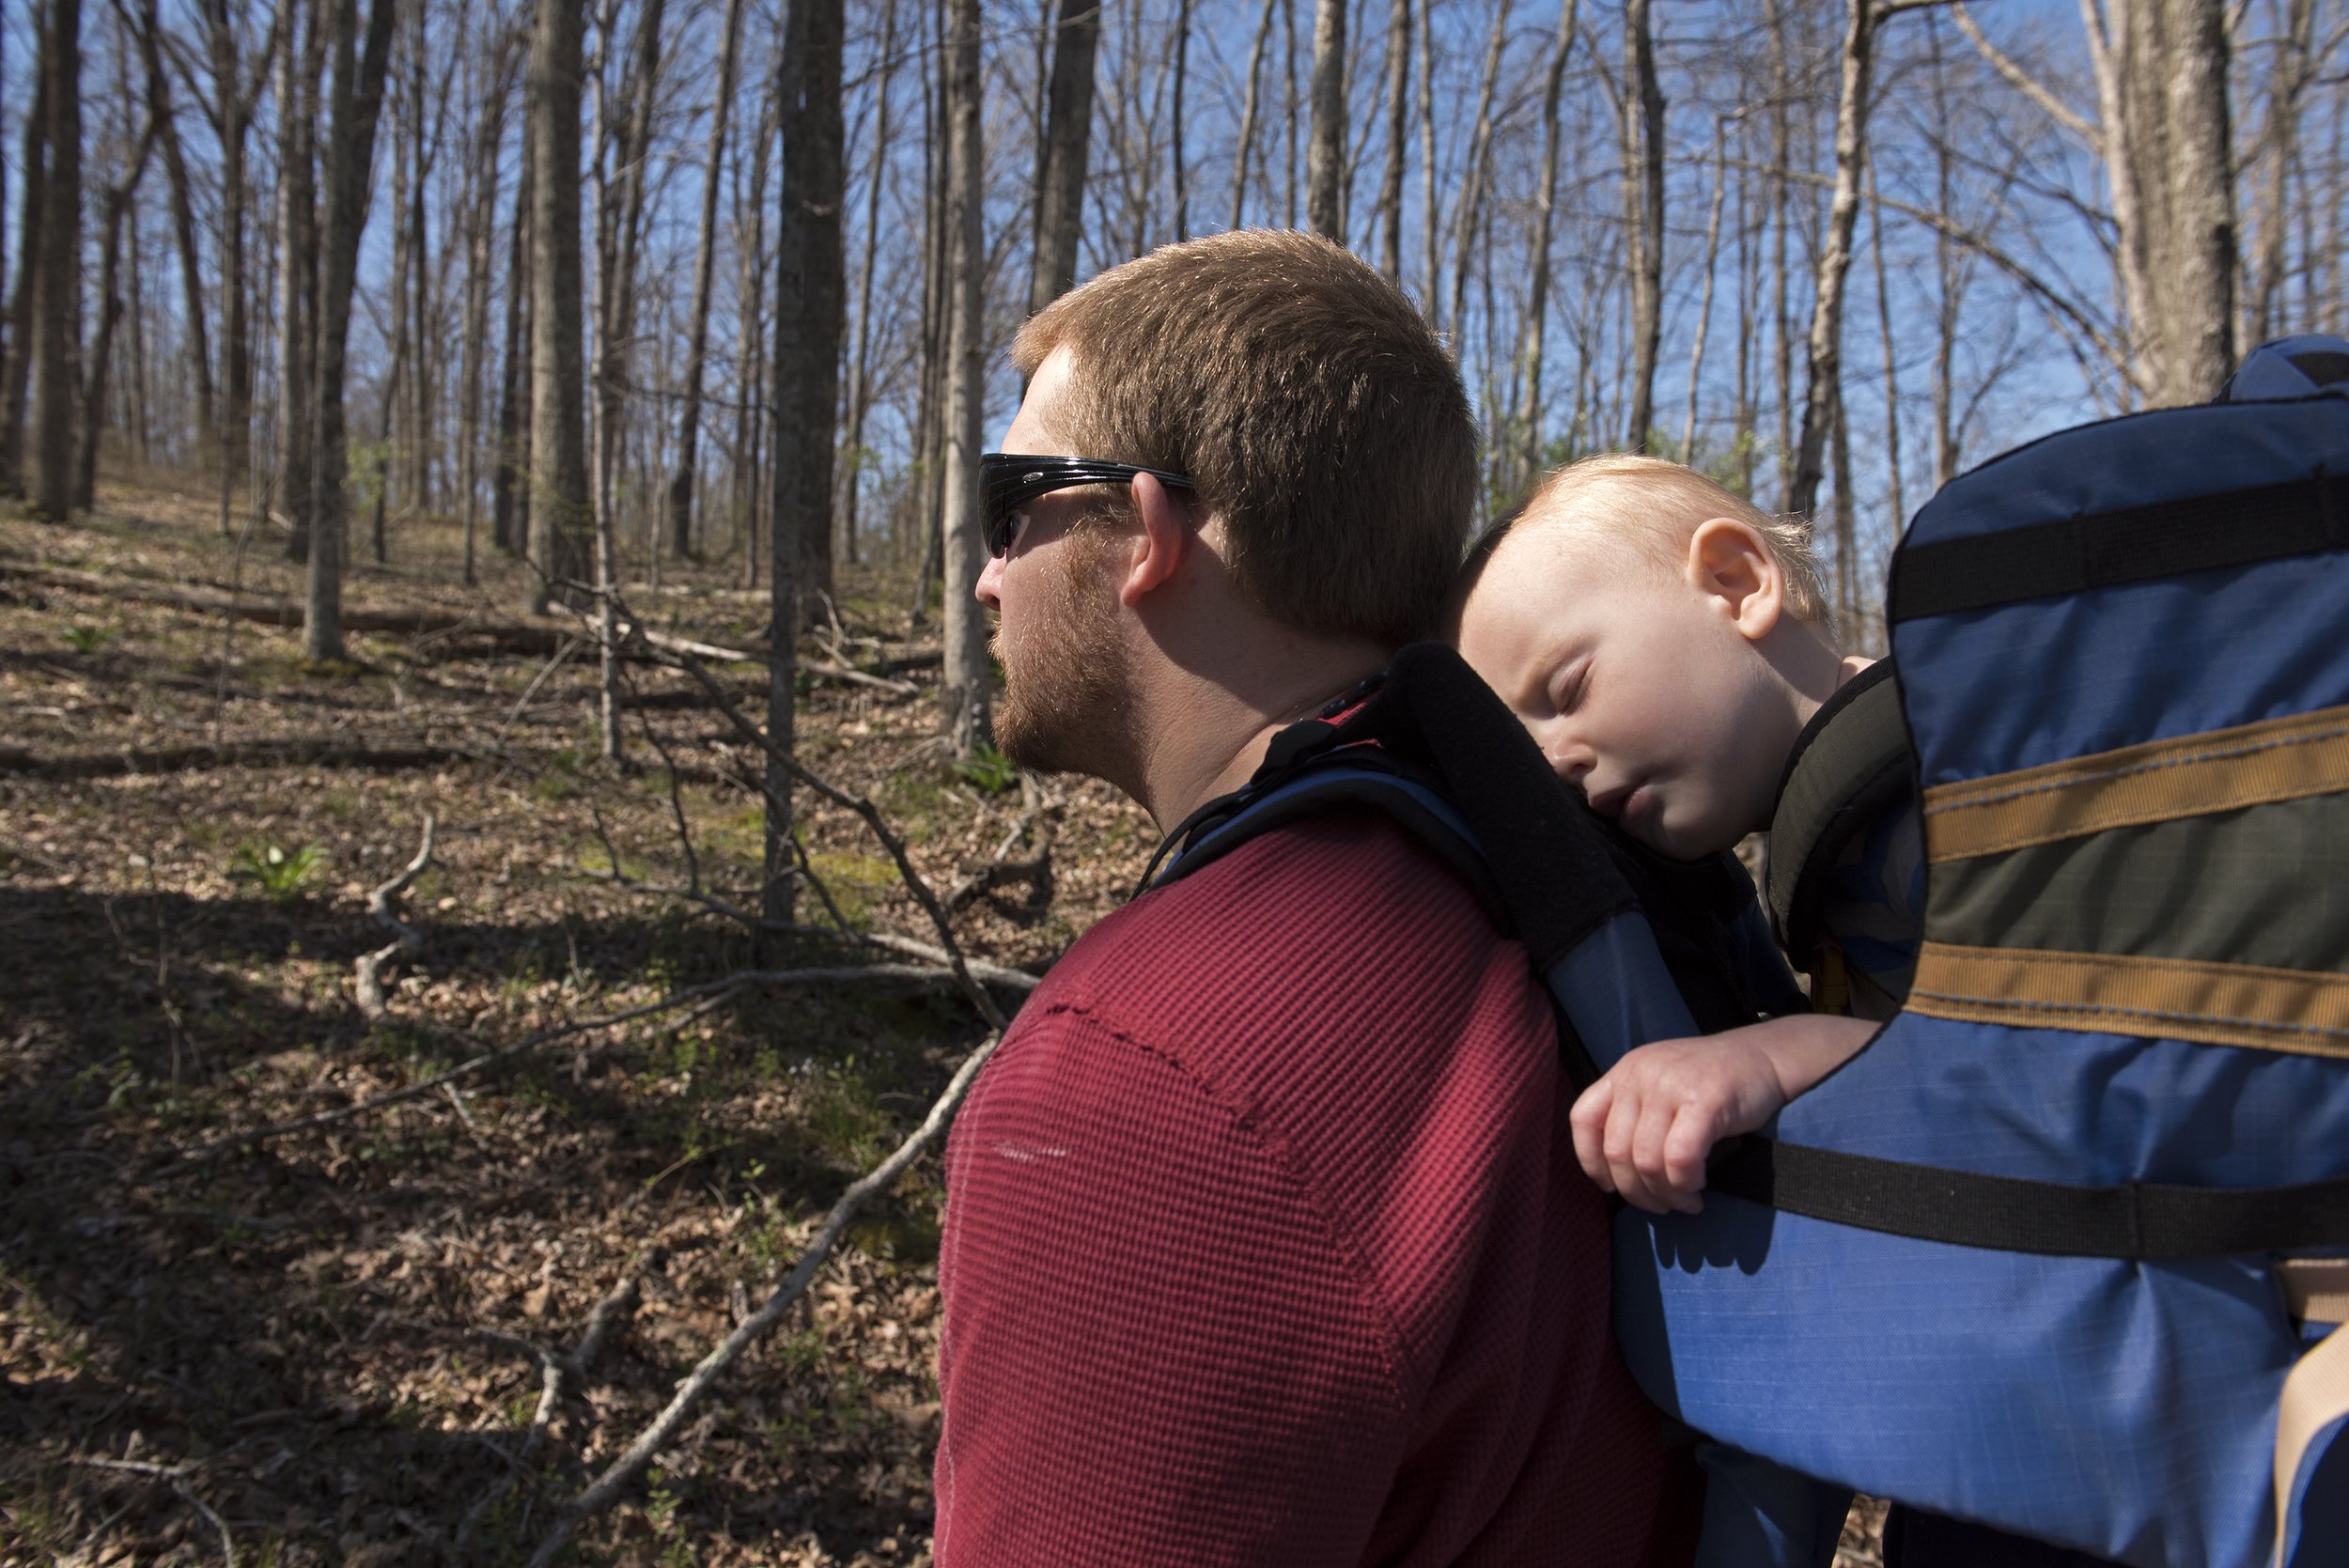  Justin Allen hikes while his son Theodore Allen, 11 months, sleeps on Trillium Trail during a session of “Backpacking Baby,” a group that meets every month to hike with their babies, April 3 in Giant City State Park in southern Illinois. Nicole Alle